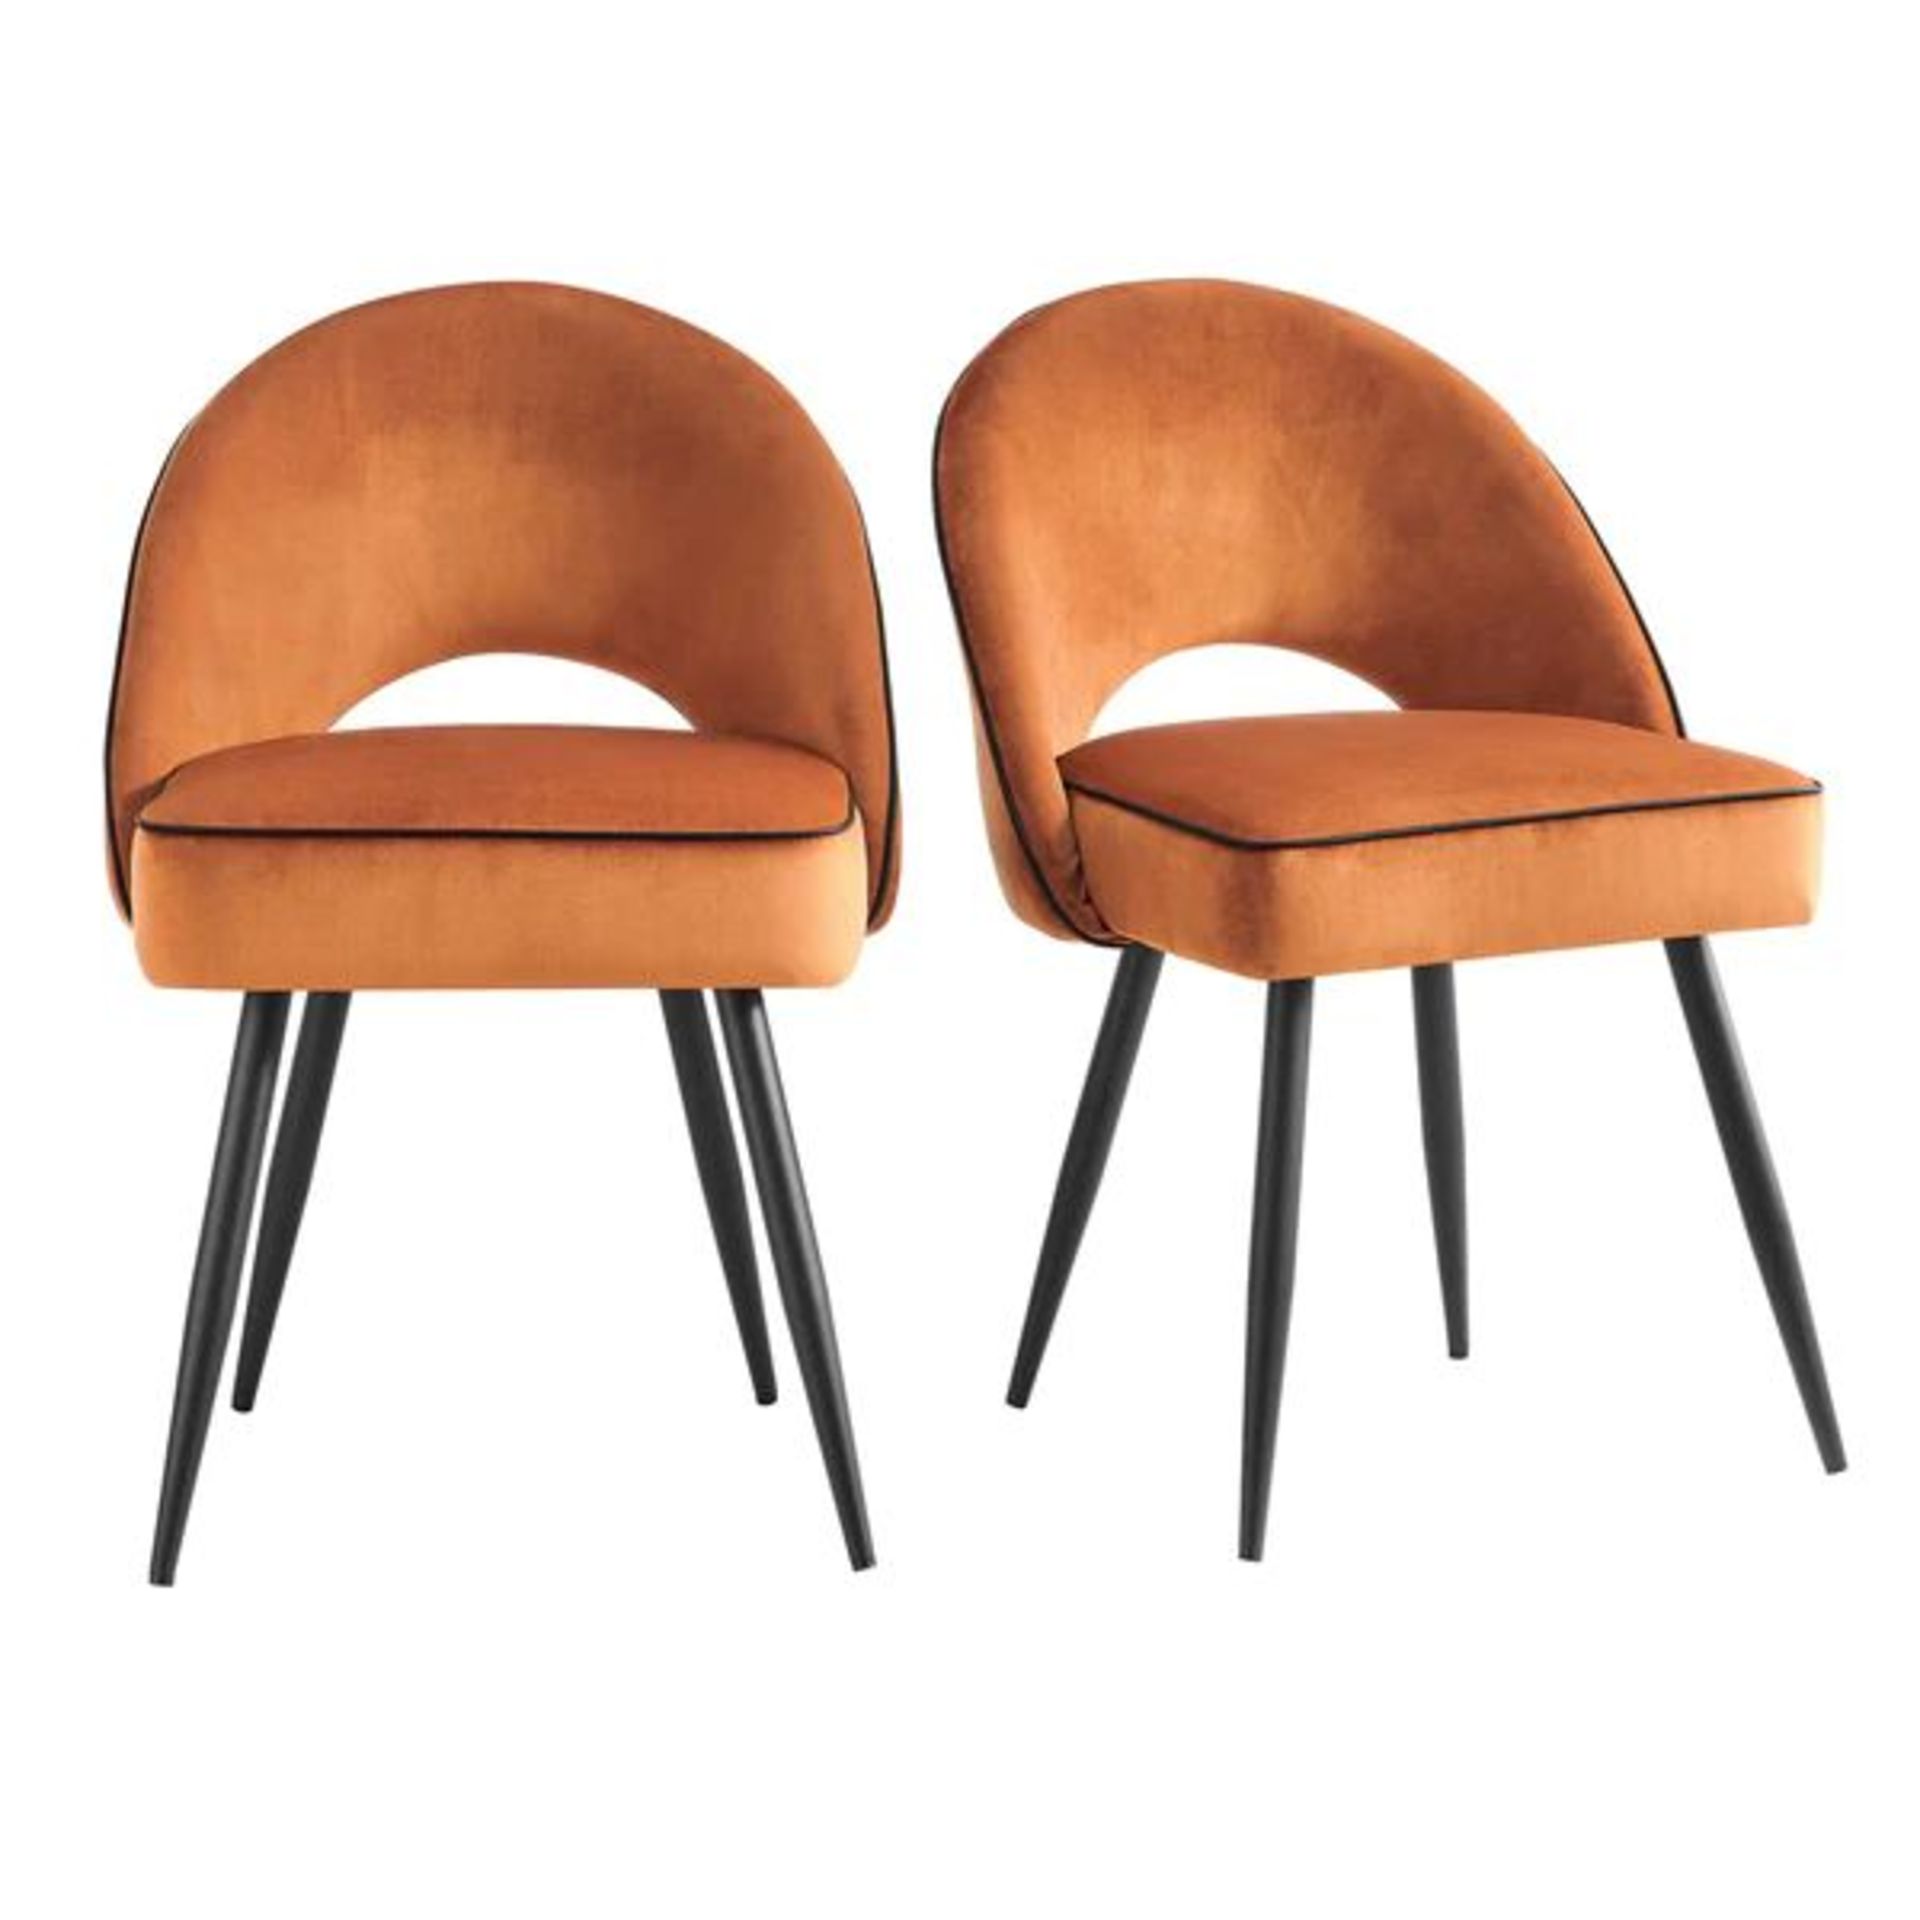 Oakley Set of 2 Orange Velvet Upholstered Dining Chairs with Contrast Piping. - ER30. RRP £279.99. - Bild 2 aus 2